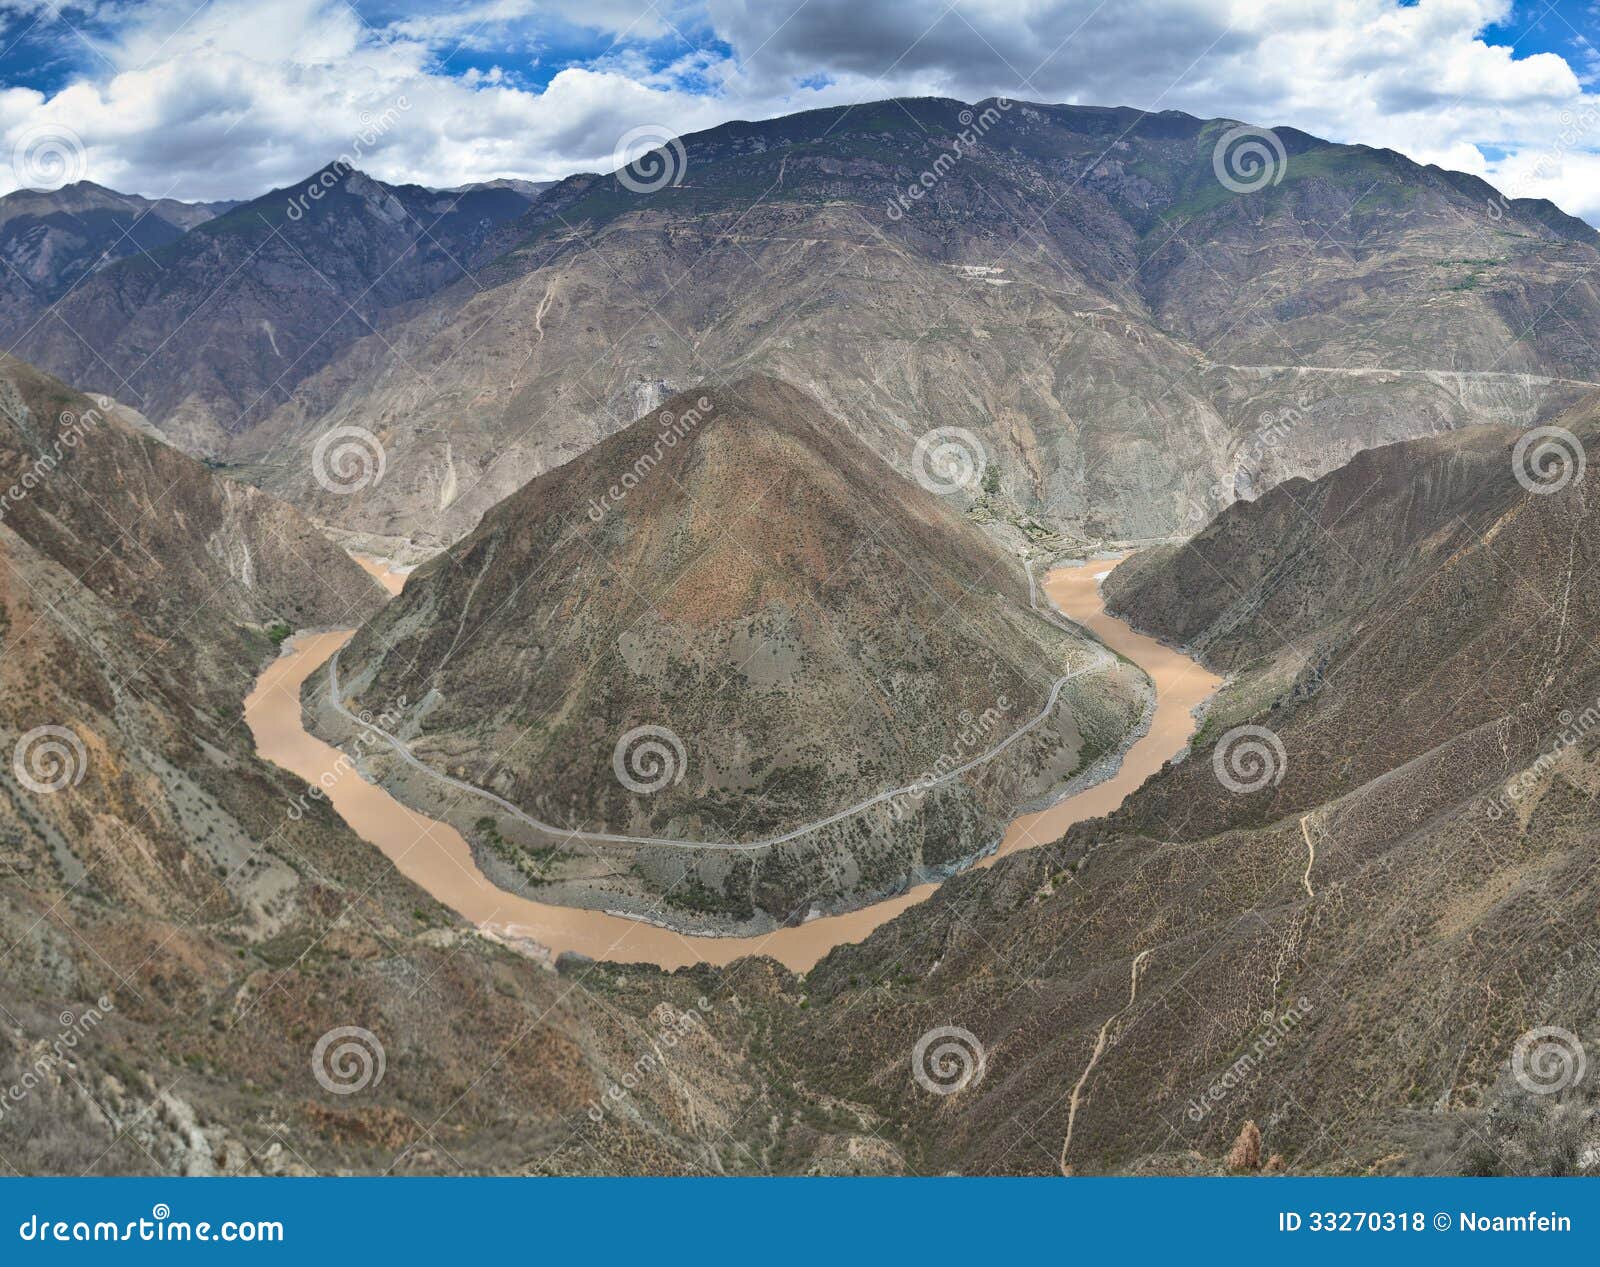 the longest river in asia is